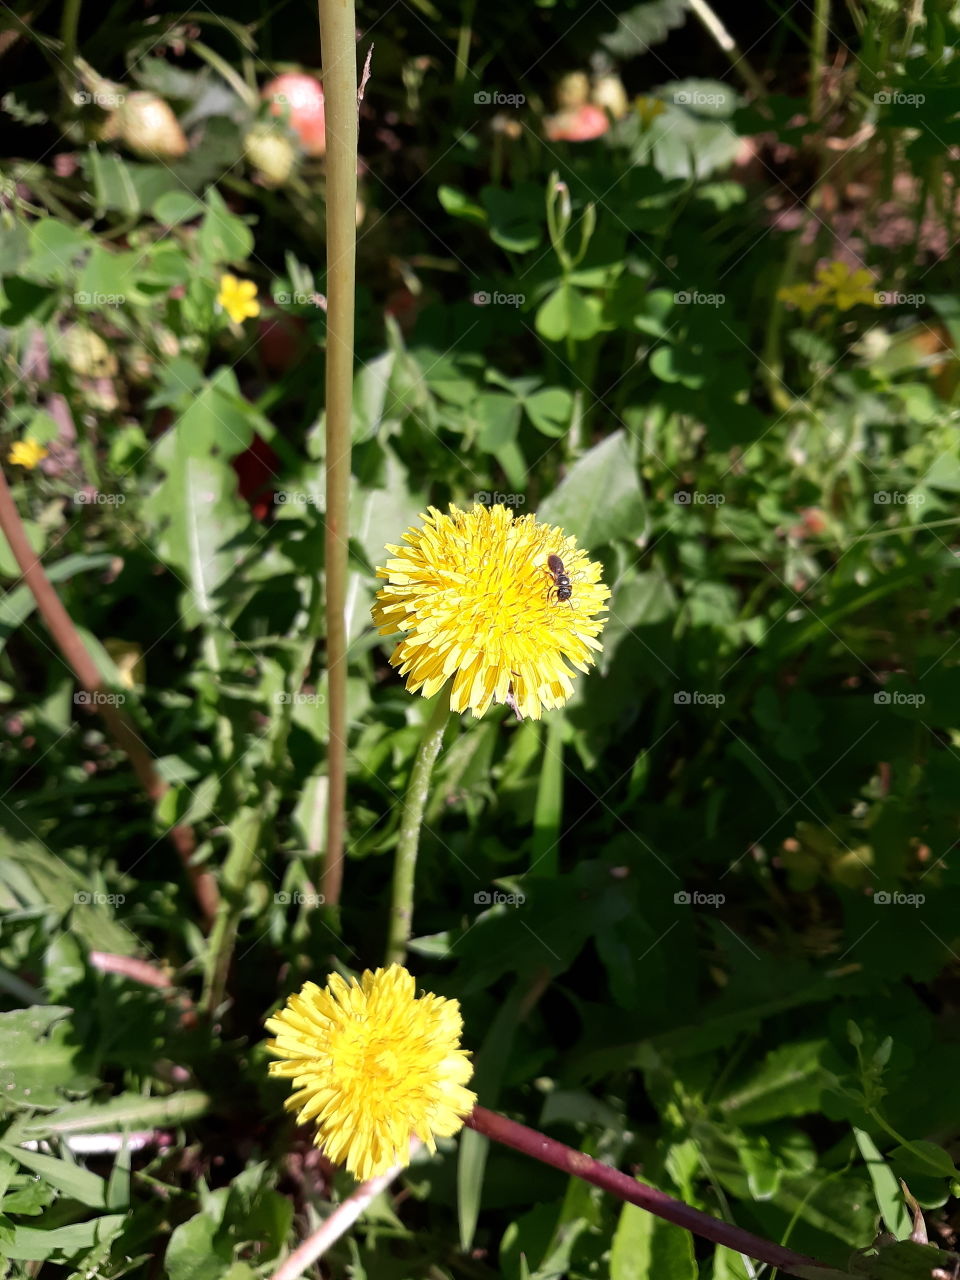 Dandelions growing wild in the strawberry patch